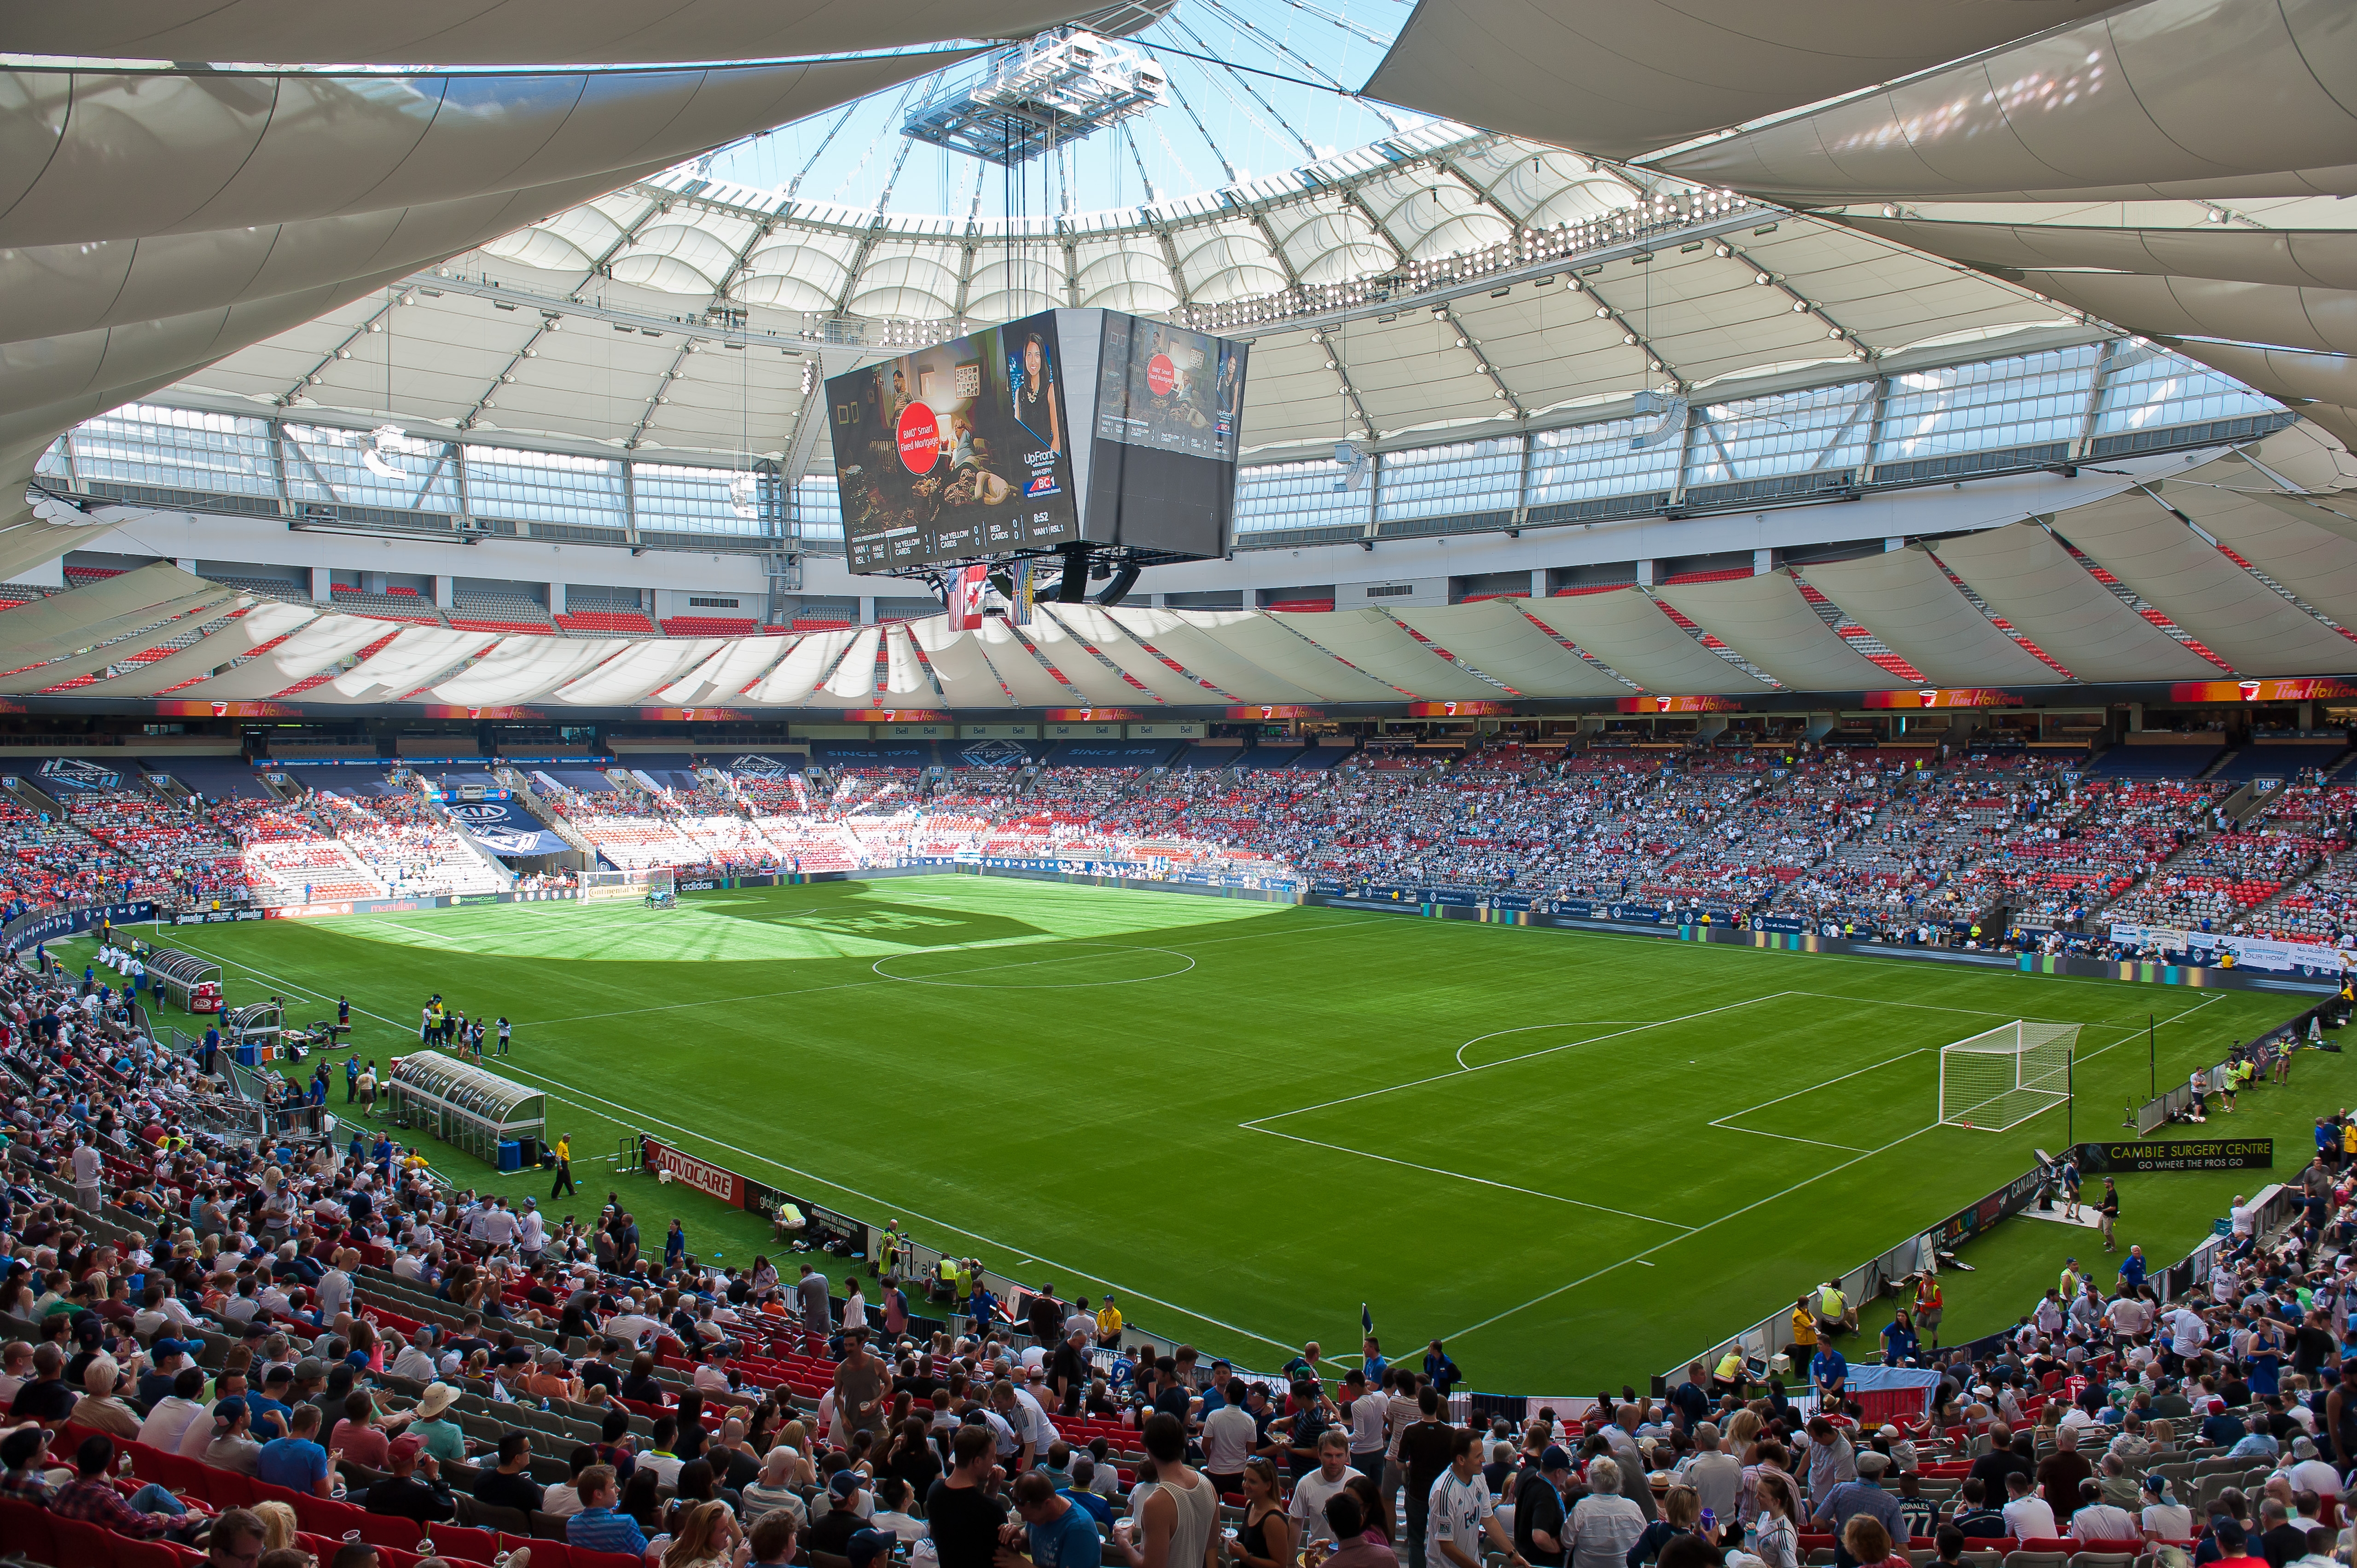 The Bc Place Stadium In Vancouver With New Synthetic Turf System From Polytan Estc Emea Synthetic Turf Council [ 3407 x 5120 Pixel ]